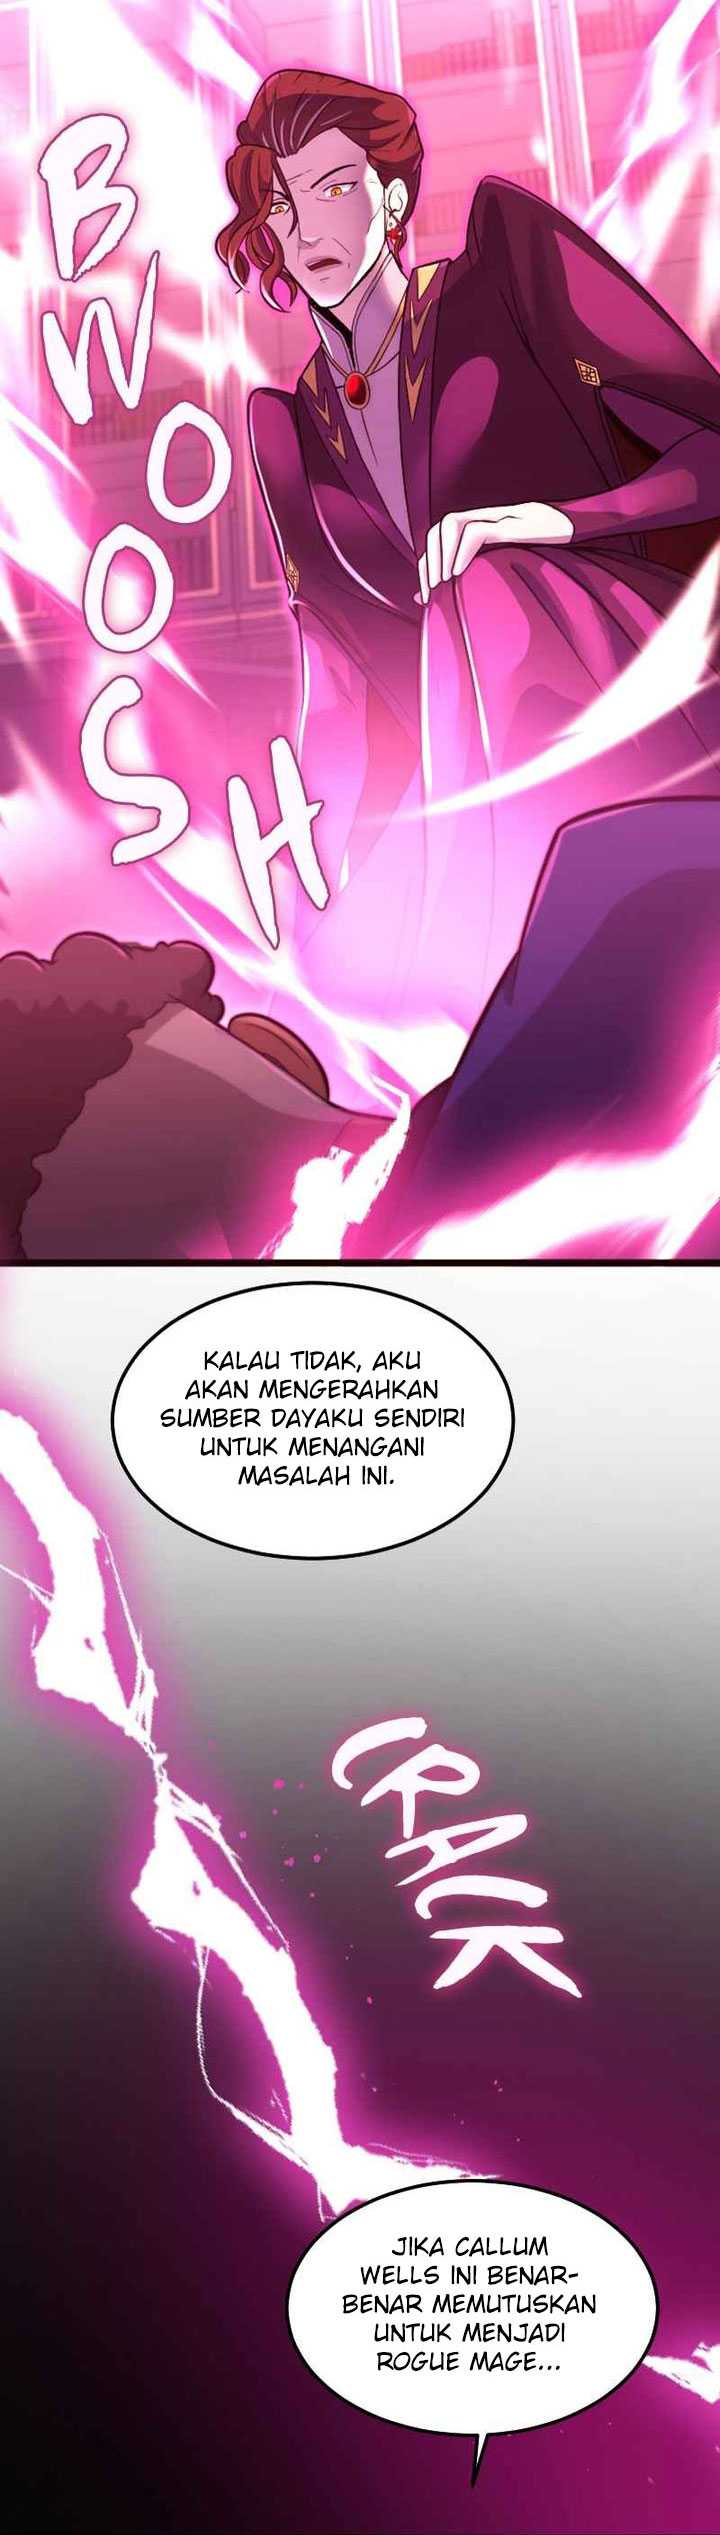 Paranoid Mage Chapter 03